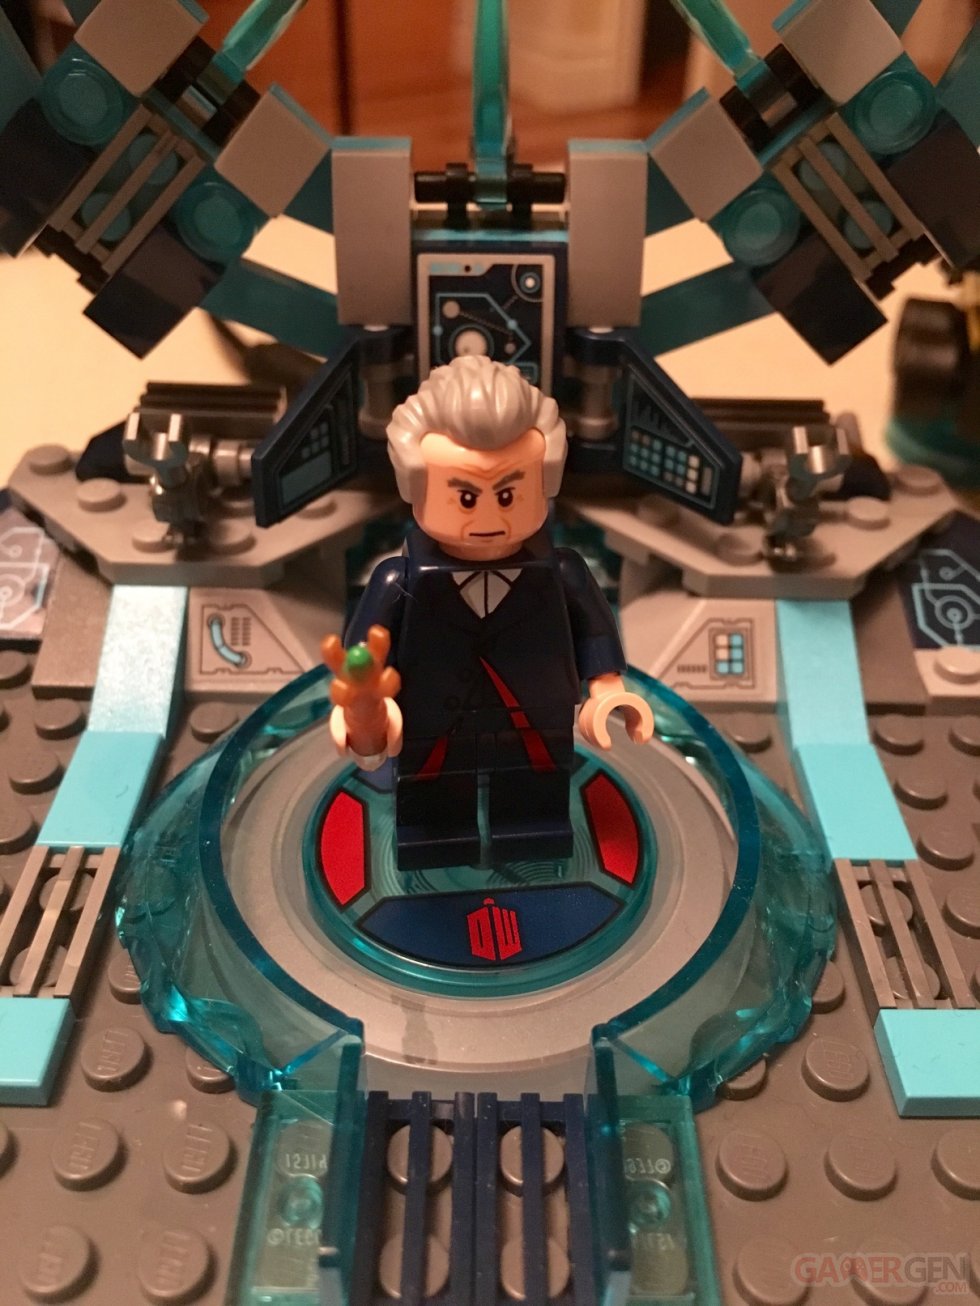 LEGO Dimensions Doctor Who Fun Pack Unboxing deballage tardis k9 - 04